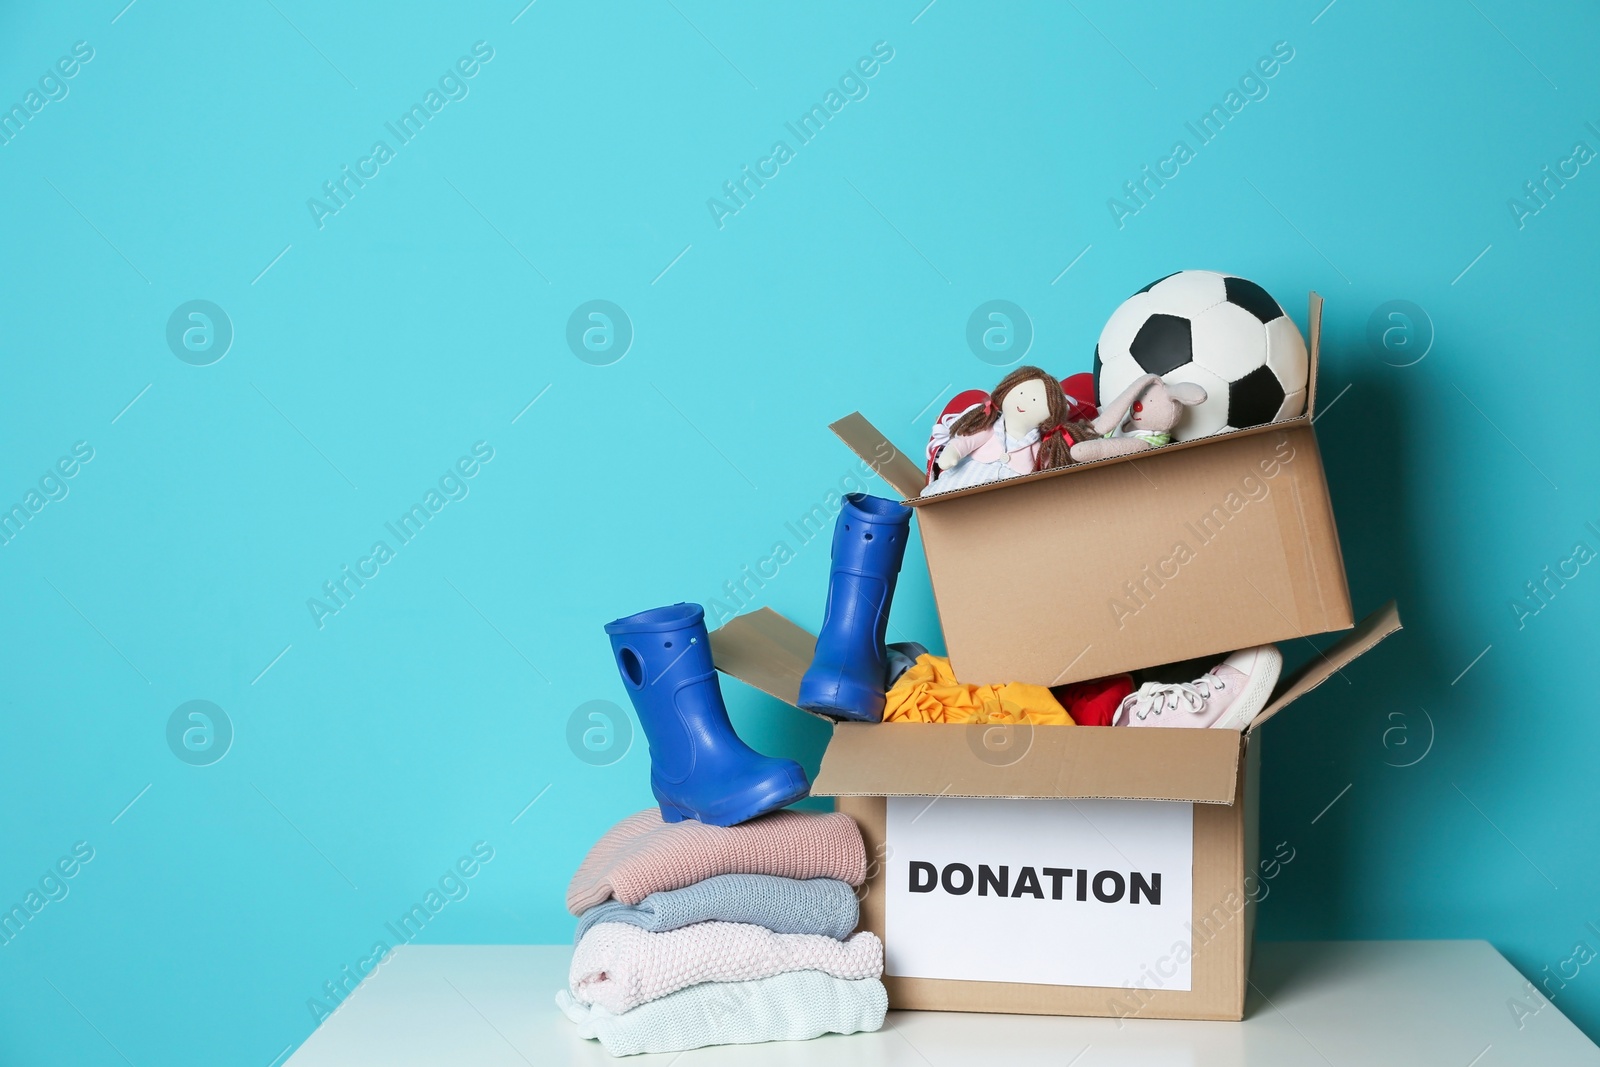 Photo of Donation boxes with toys, knitted clothes and shoes on table against color background. Space for text